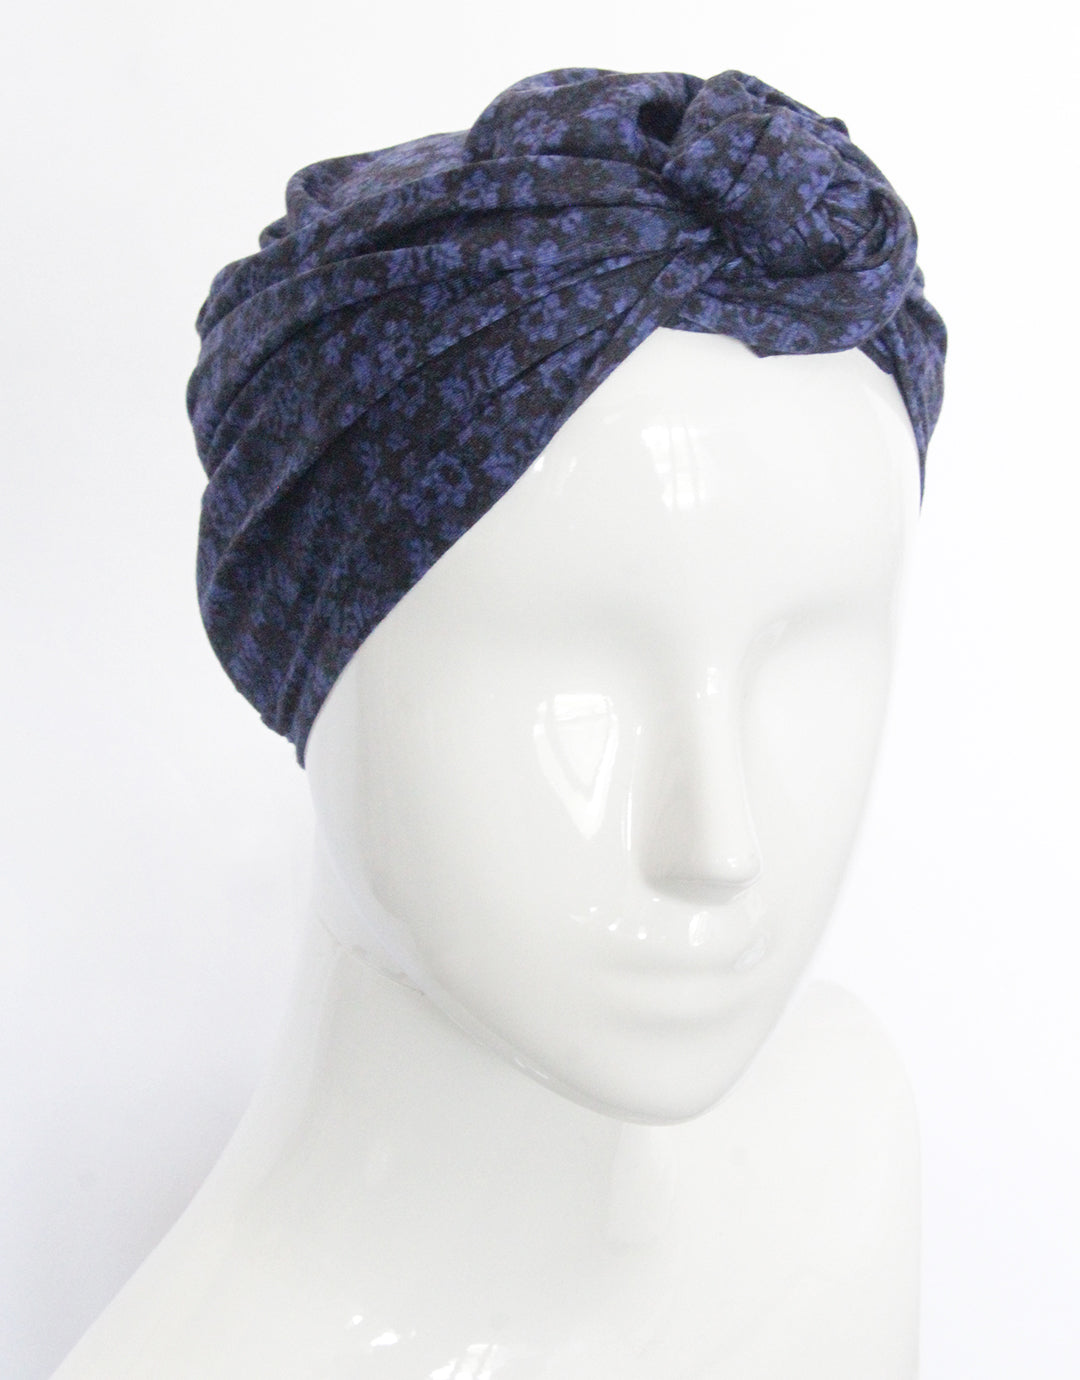 BANDED Women’s Full Coverage Headwraps + Hair Accessories - Blue Brocade - Multi-style Headwrap